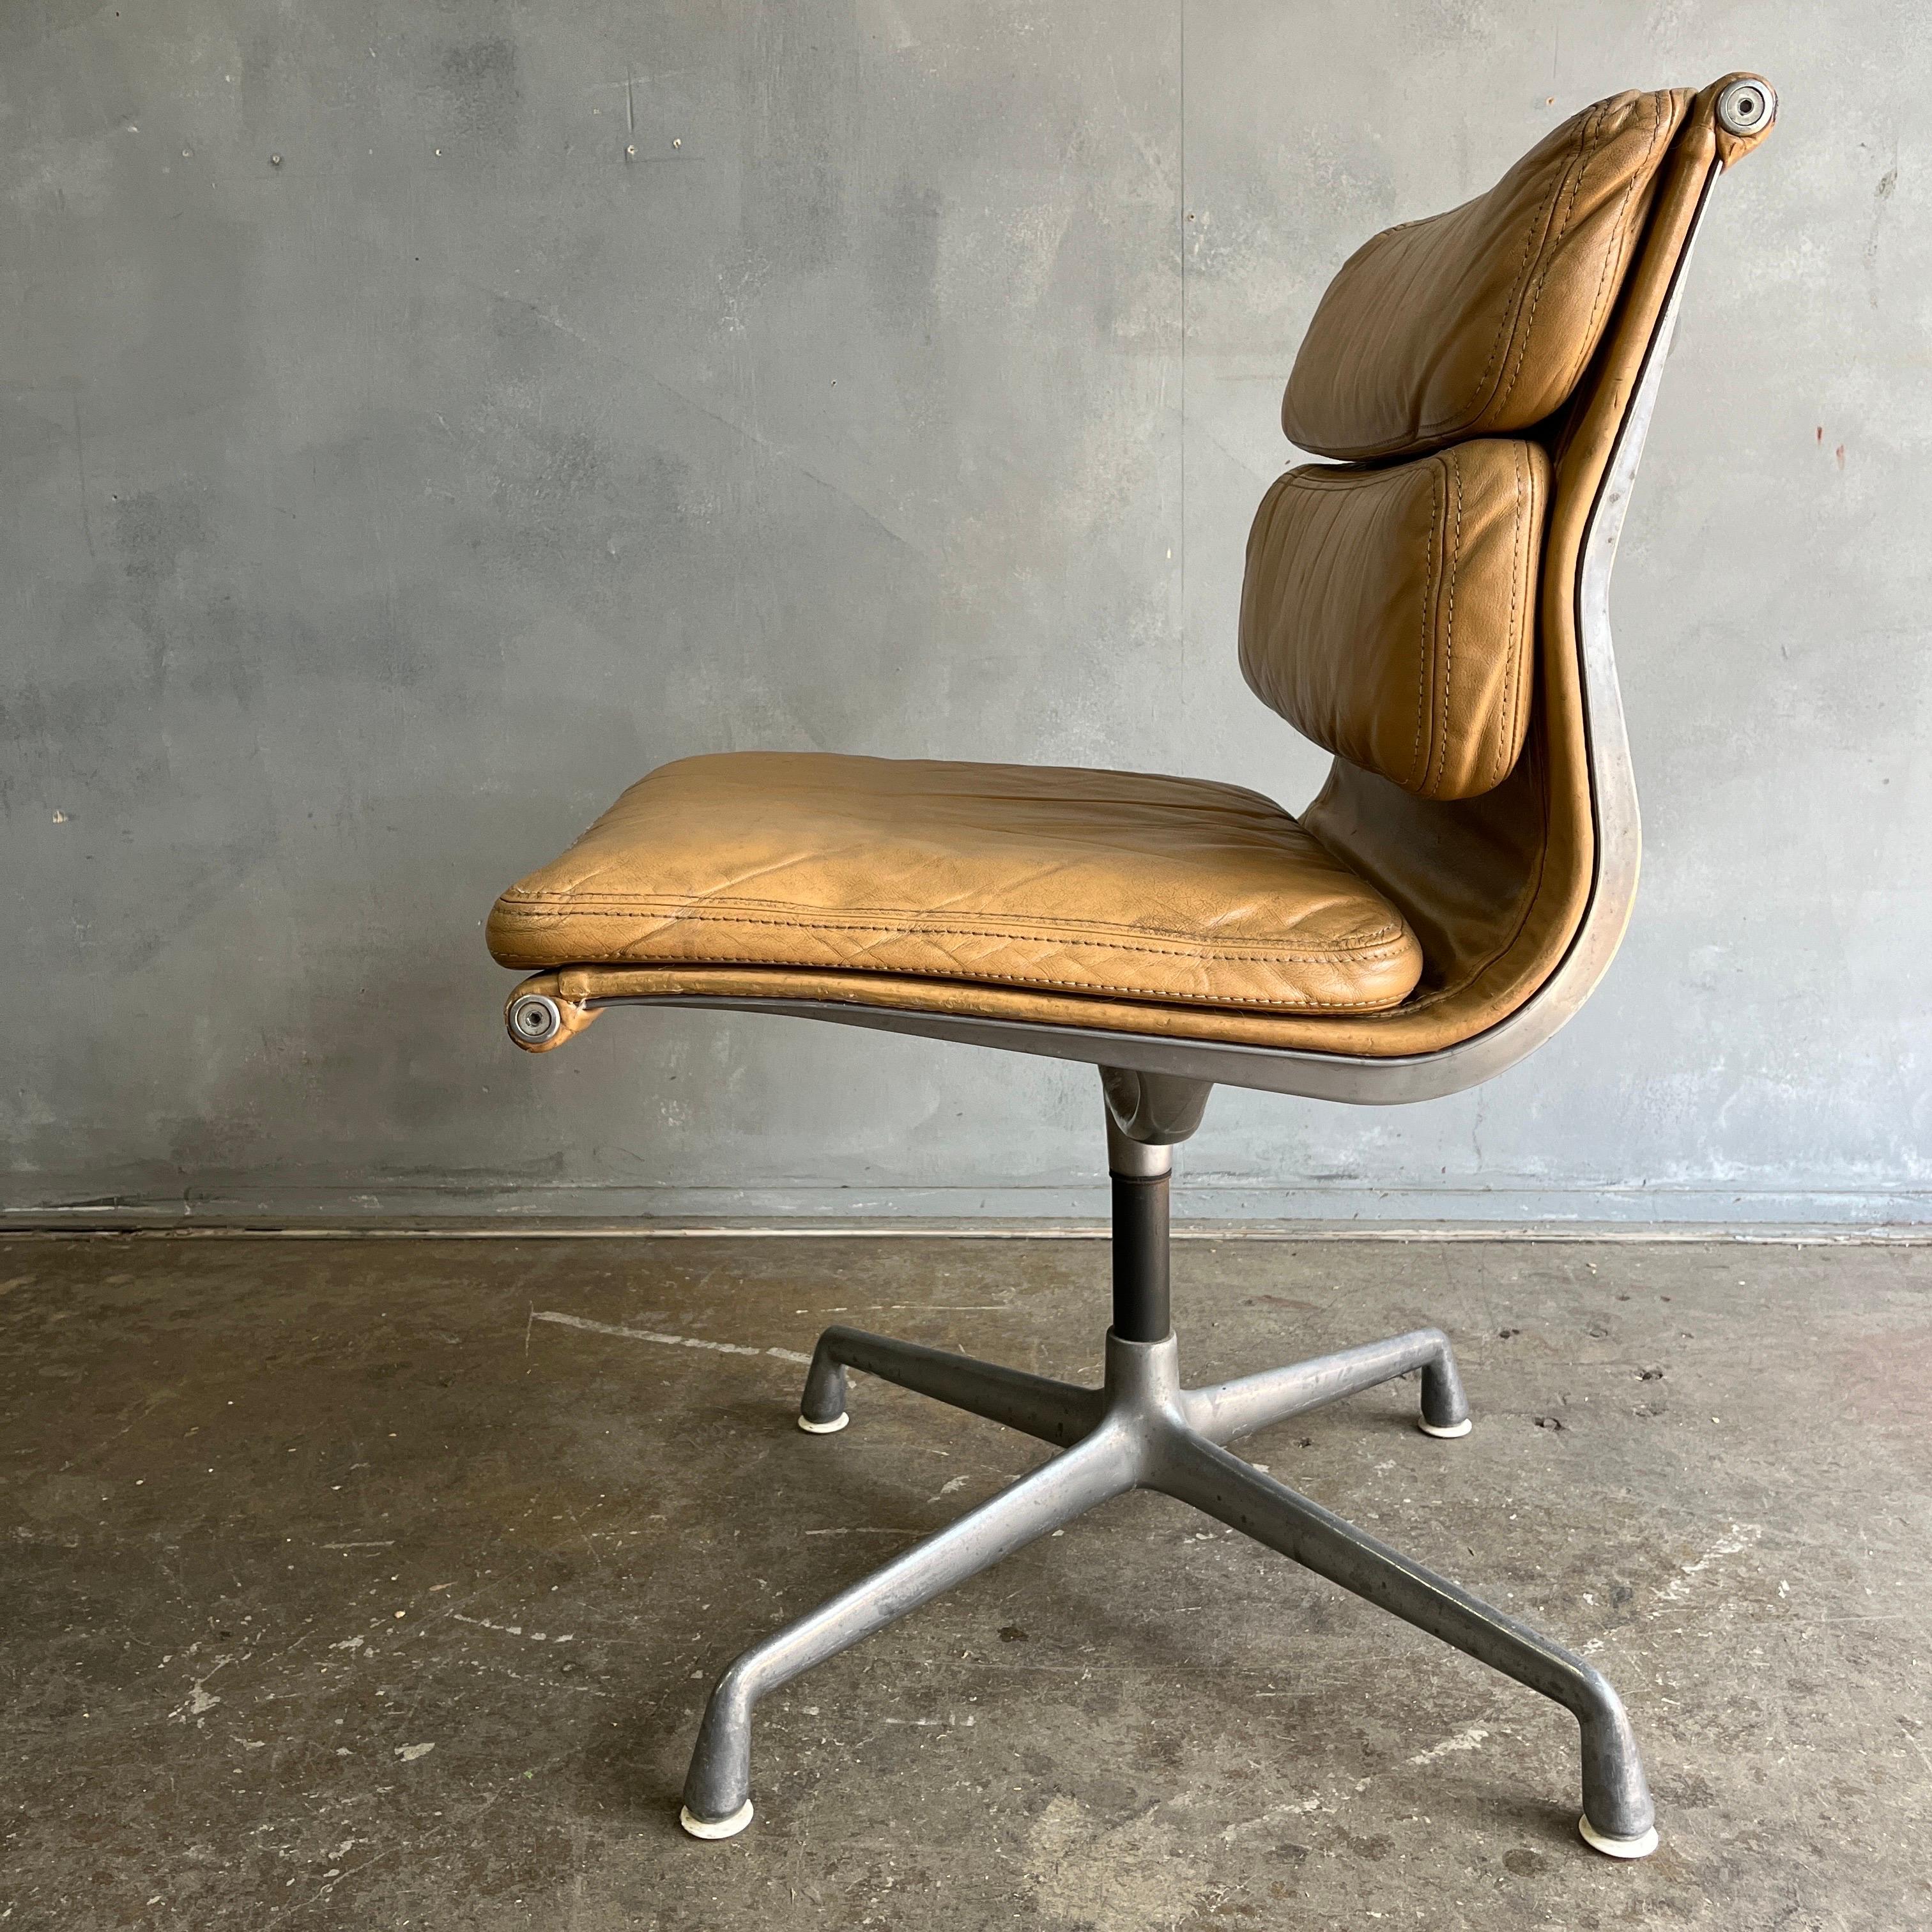 For your consideration is this authentic Eames for Herman Miller vintage soft pad chair in brown/ tan leather. Swivel and fixed height. This authentic vintage example is an icon of Mid-Century Modern design. Part of the Eames Aluminum Group that